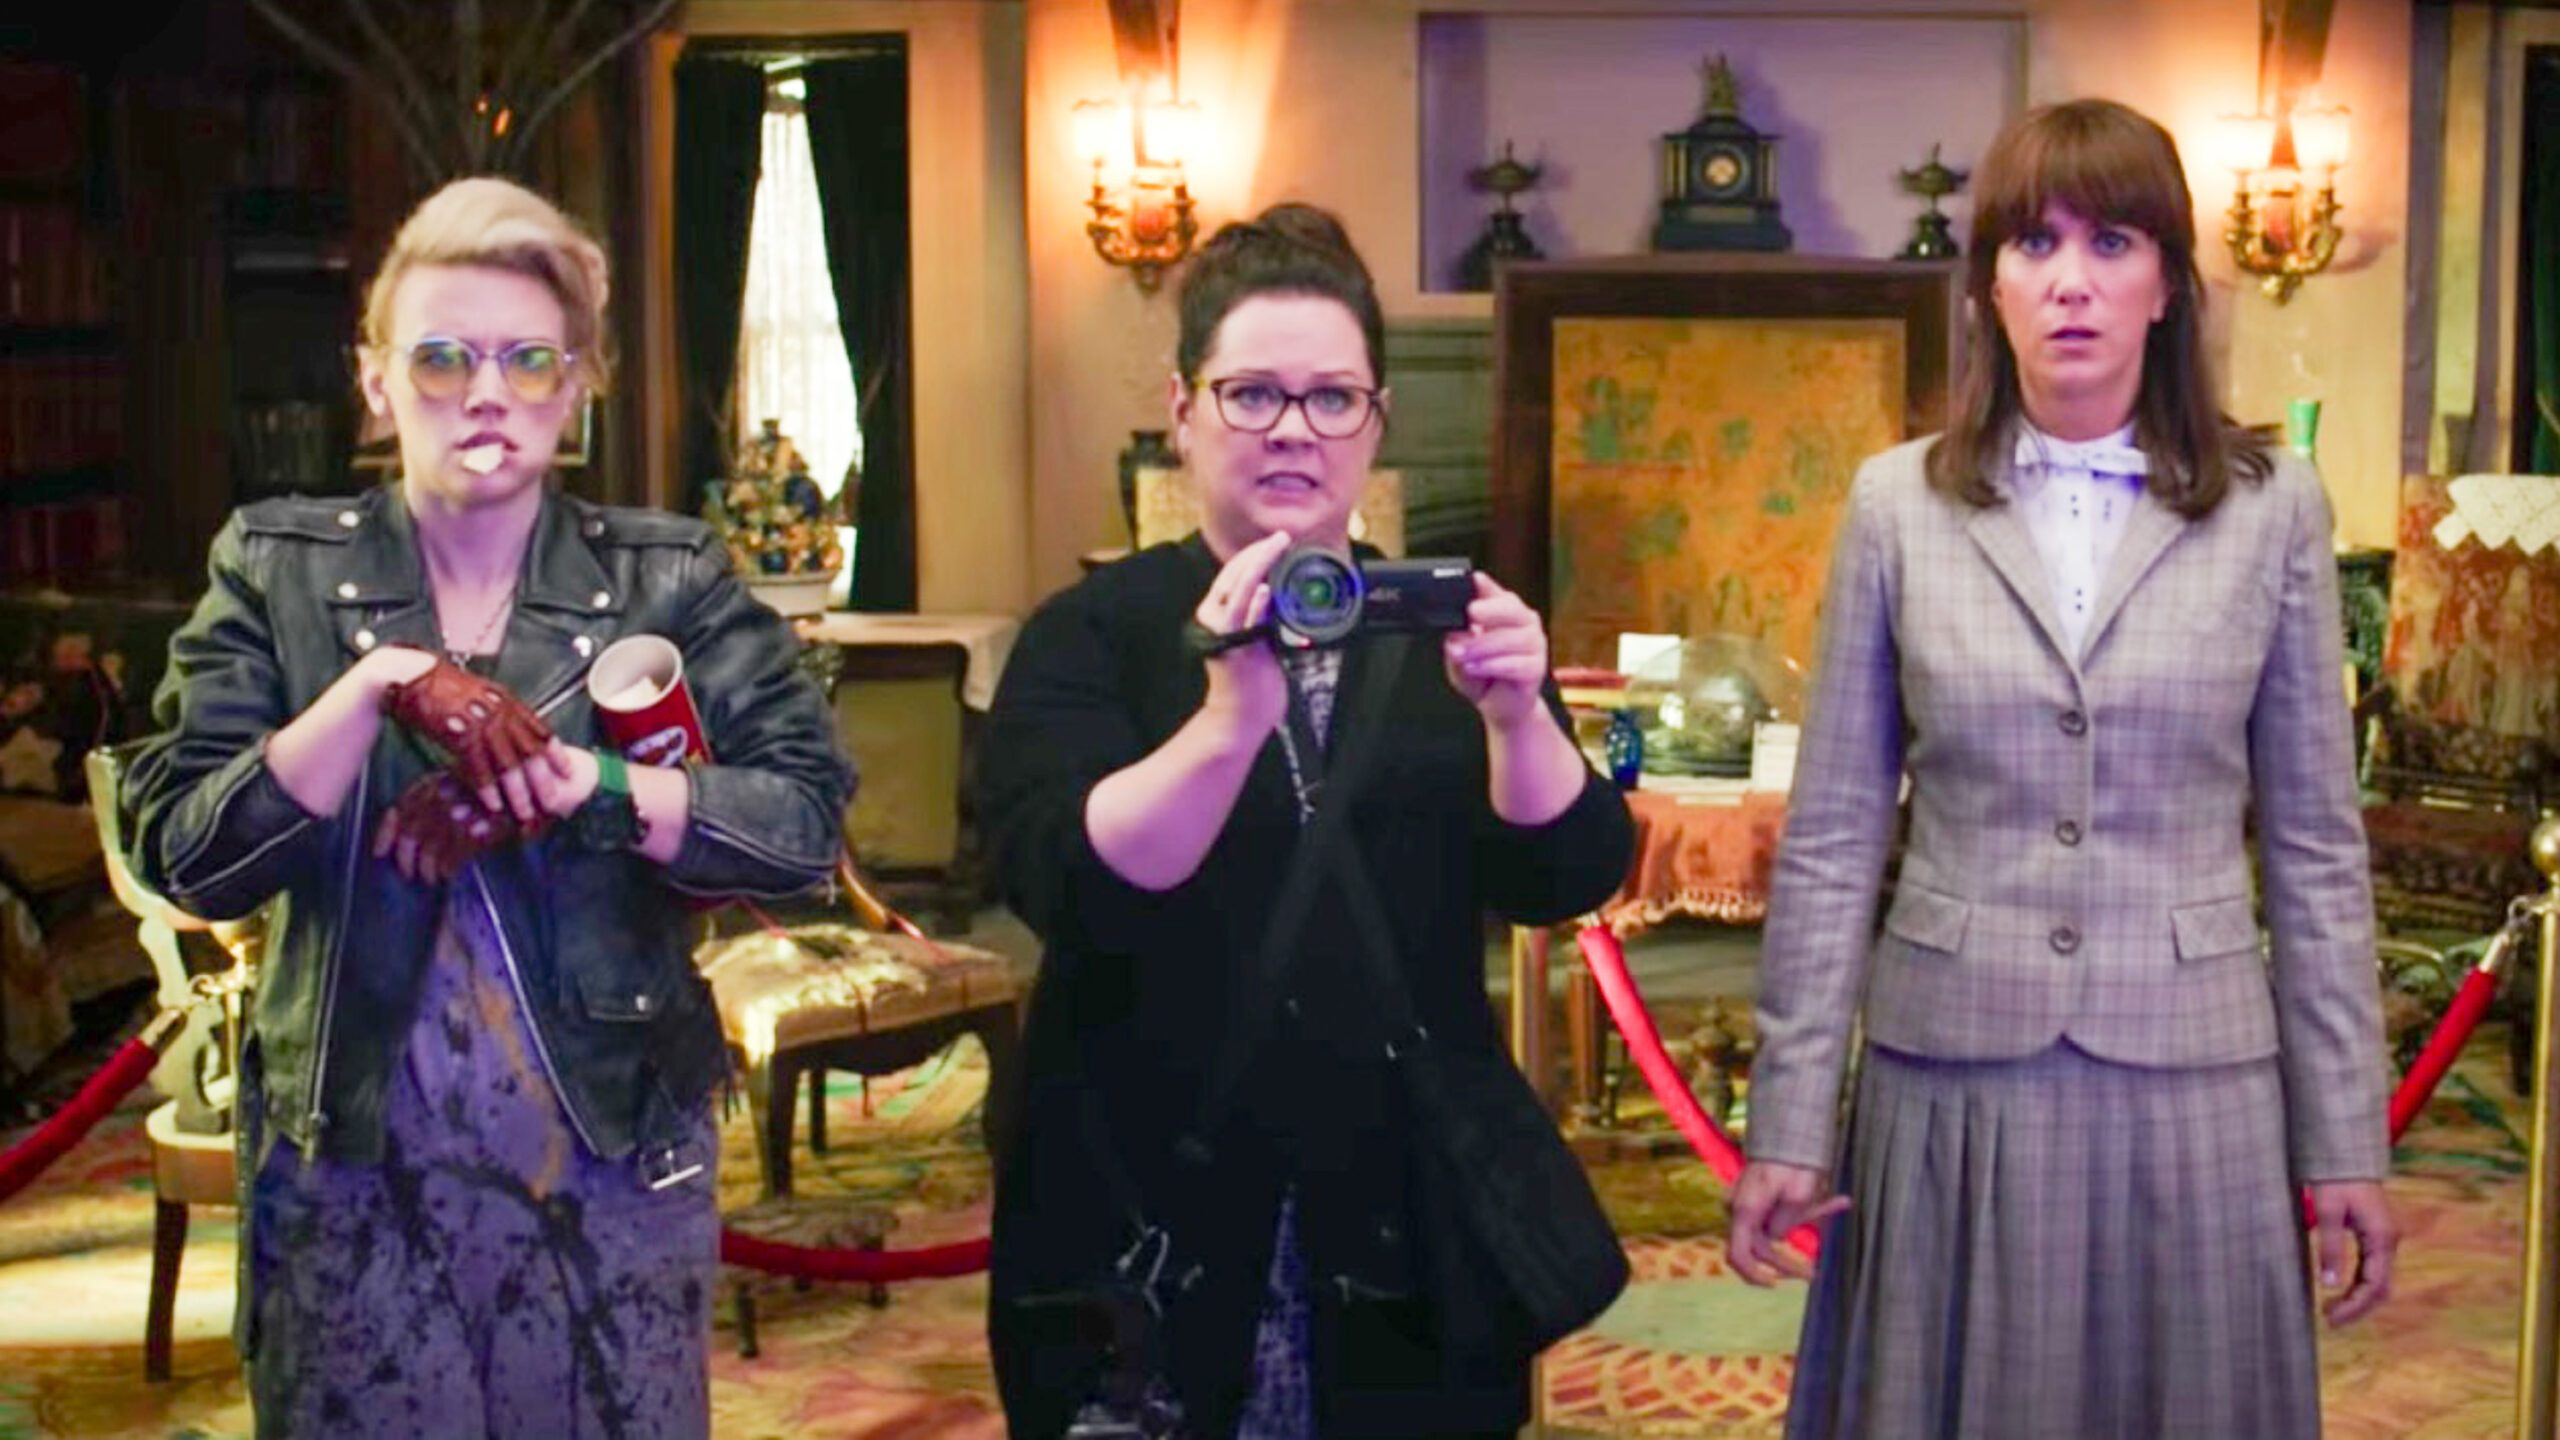 ‘Ghostbusters’ backlash reflects Hollywood’s sexism problem